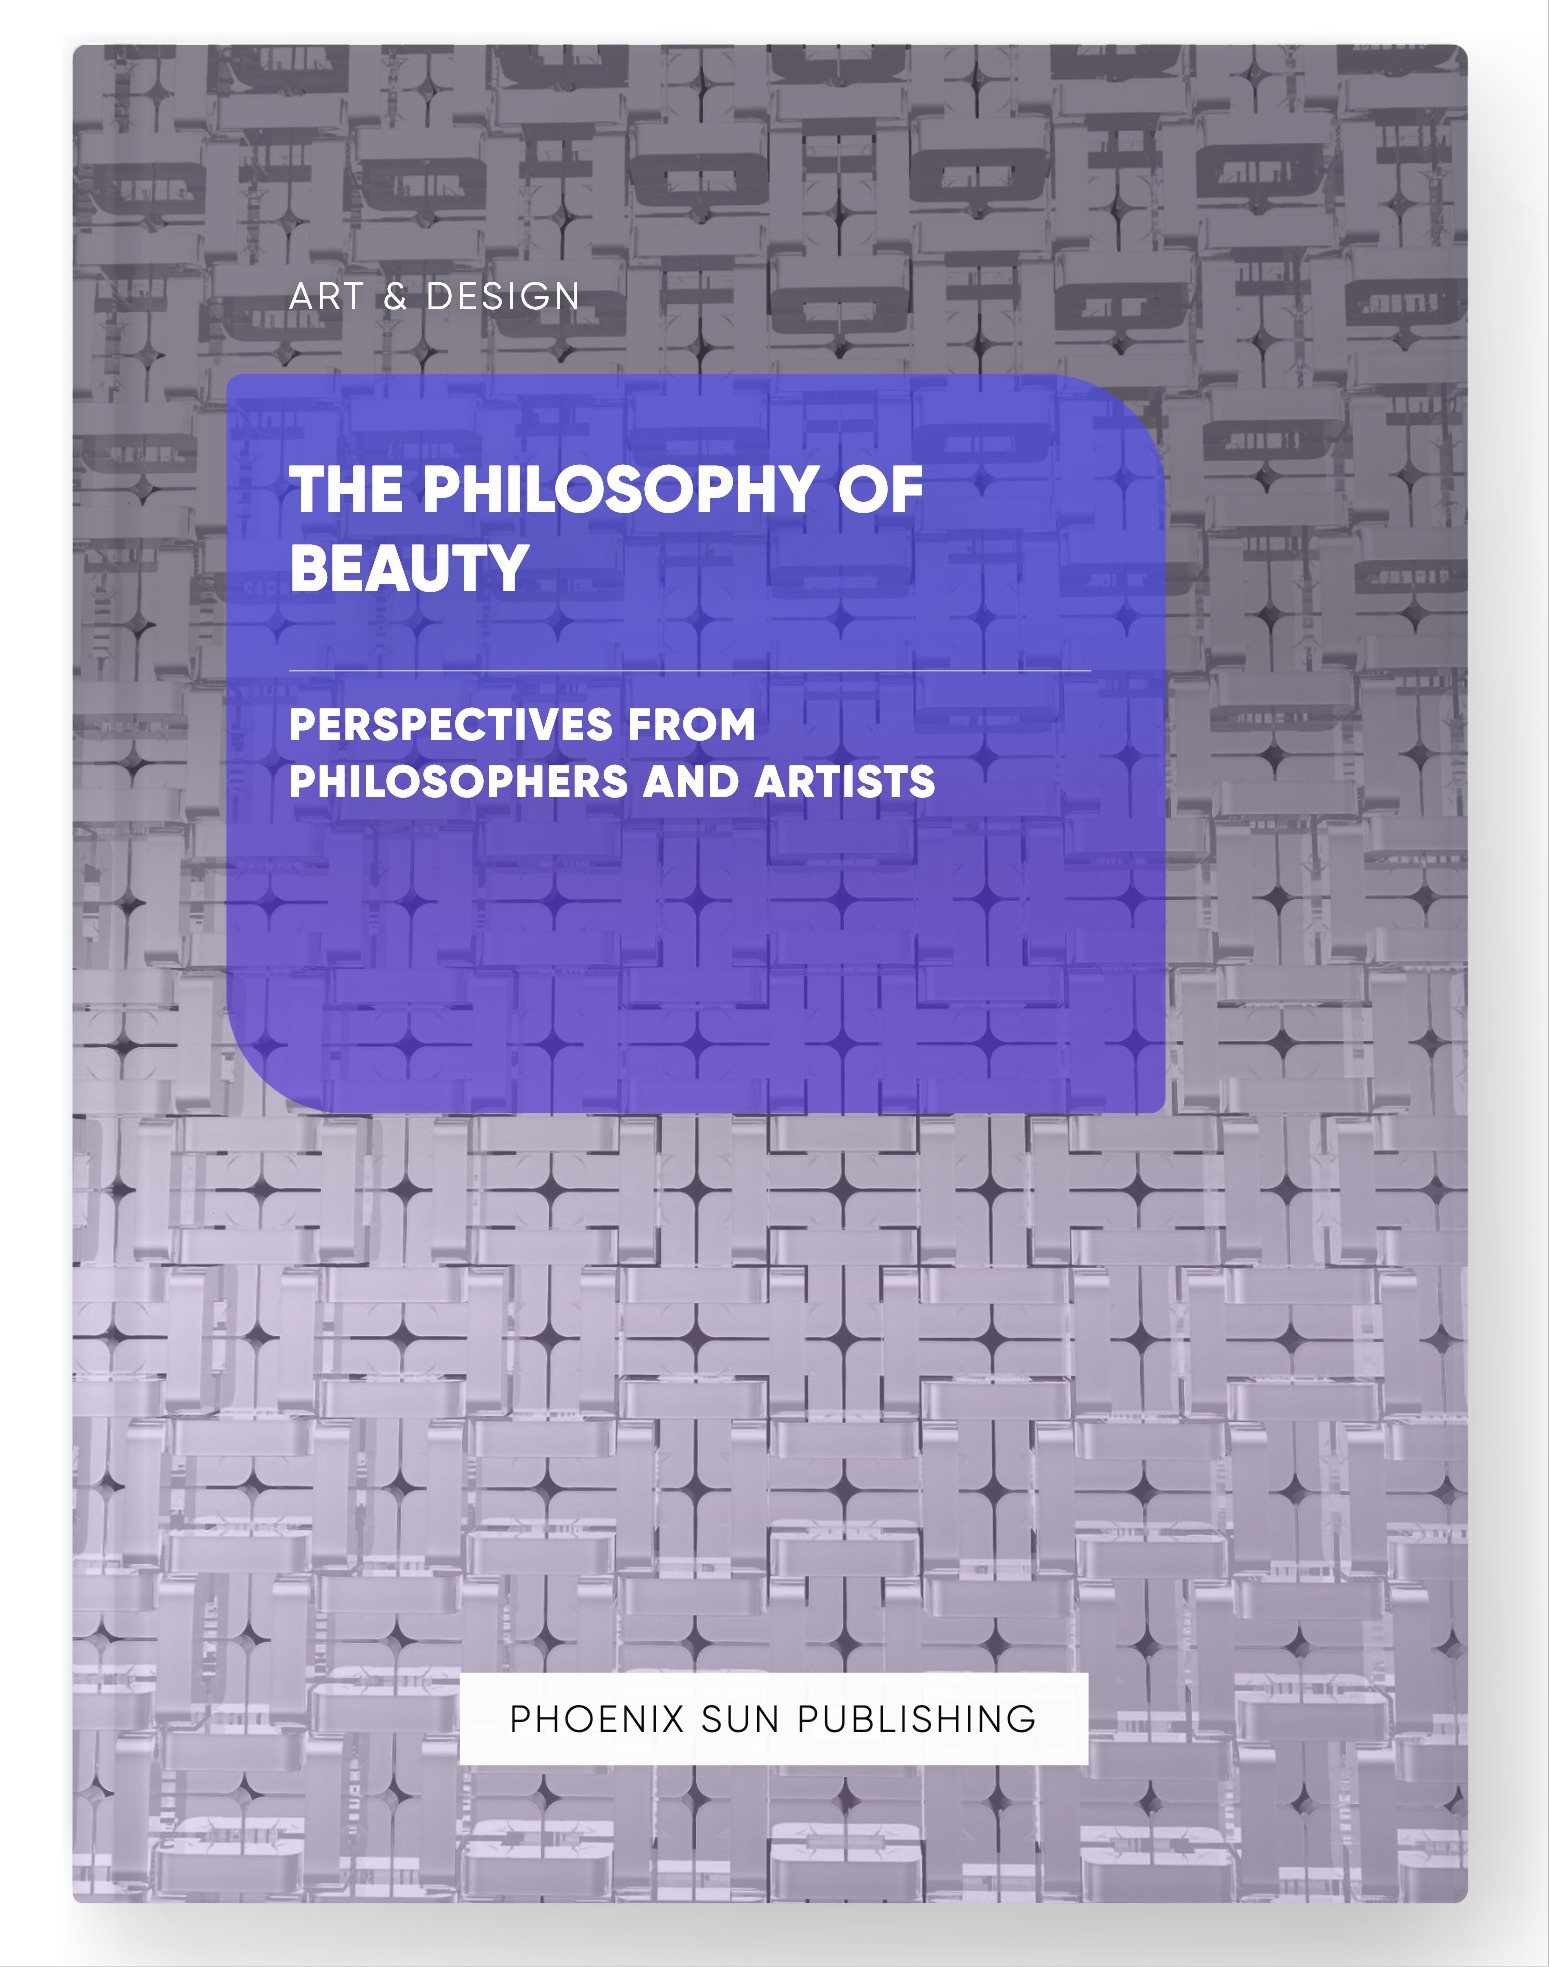 The Philosophy of Beauty – Perspectives from Philosophers and Artists